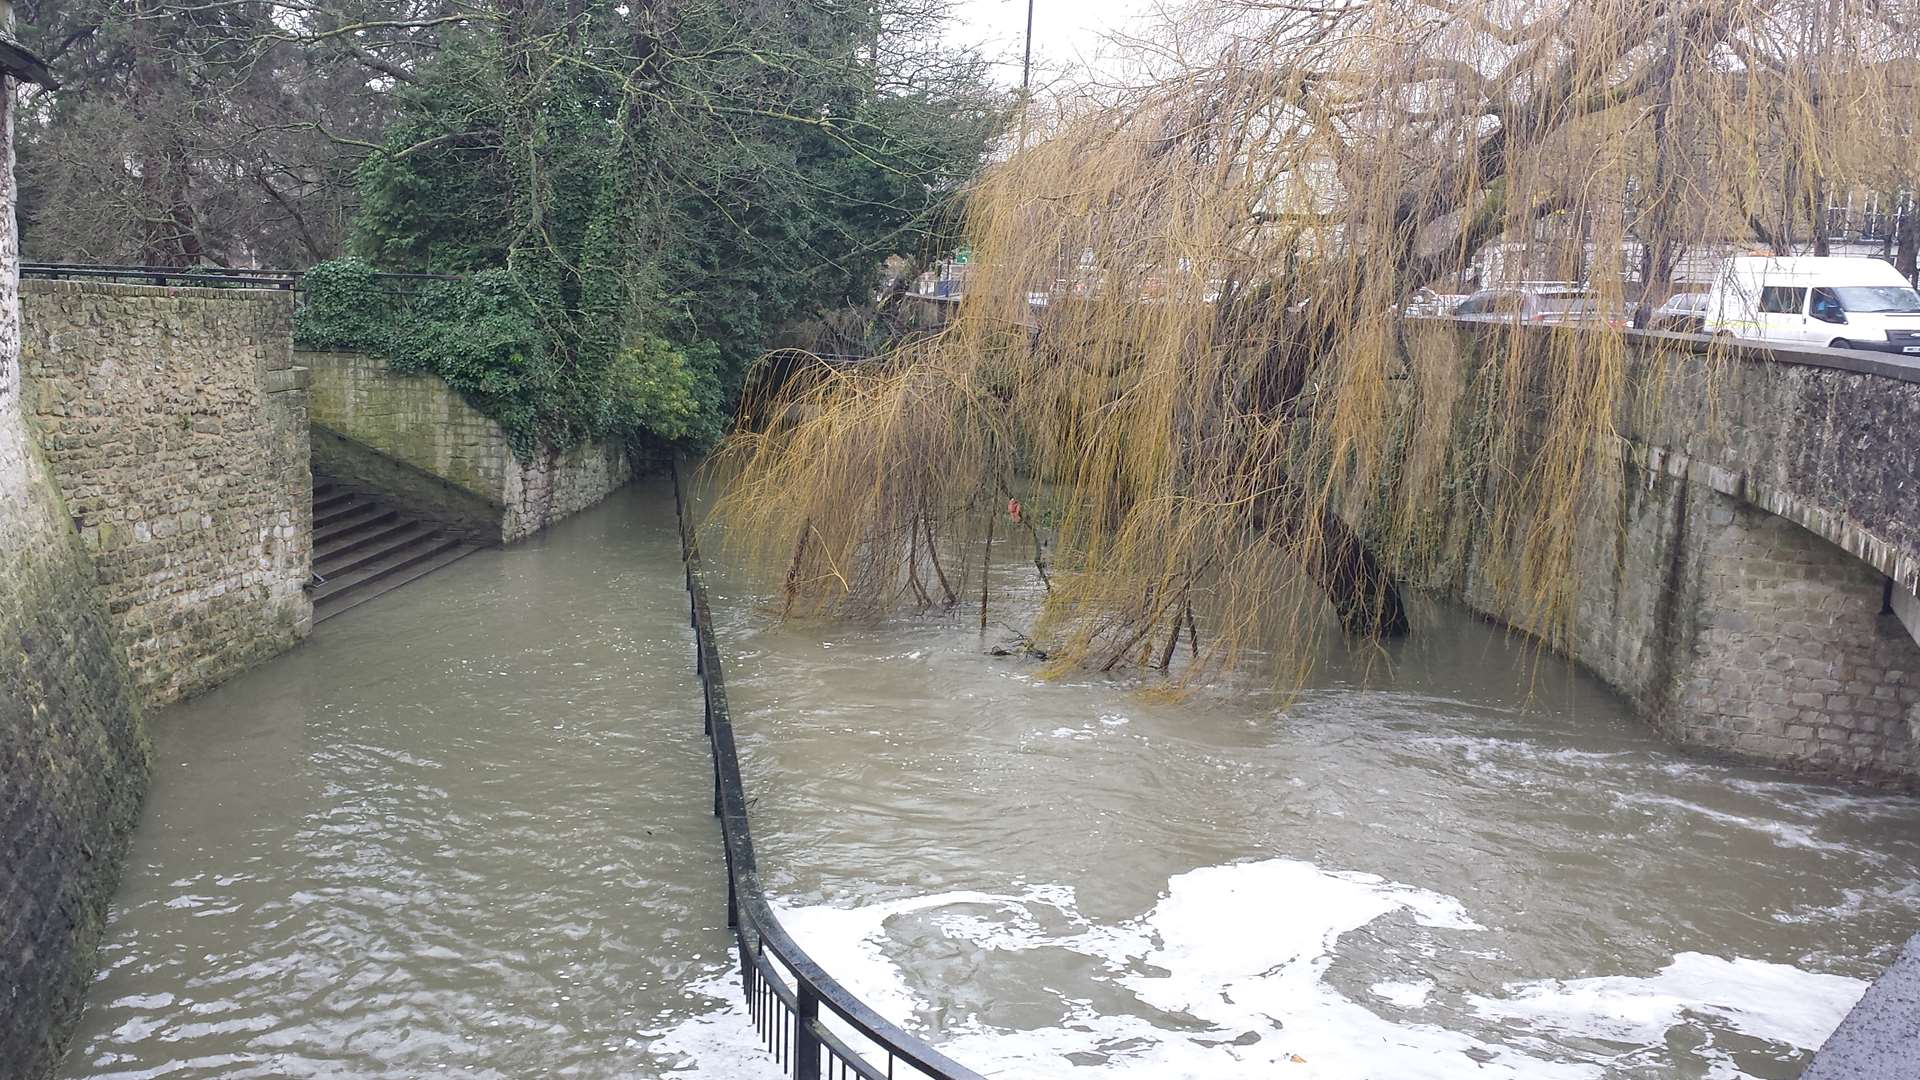 The River Medway's water levels were noticeably high